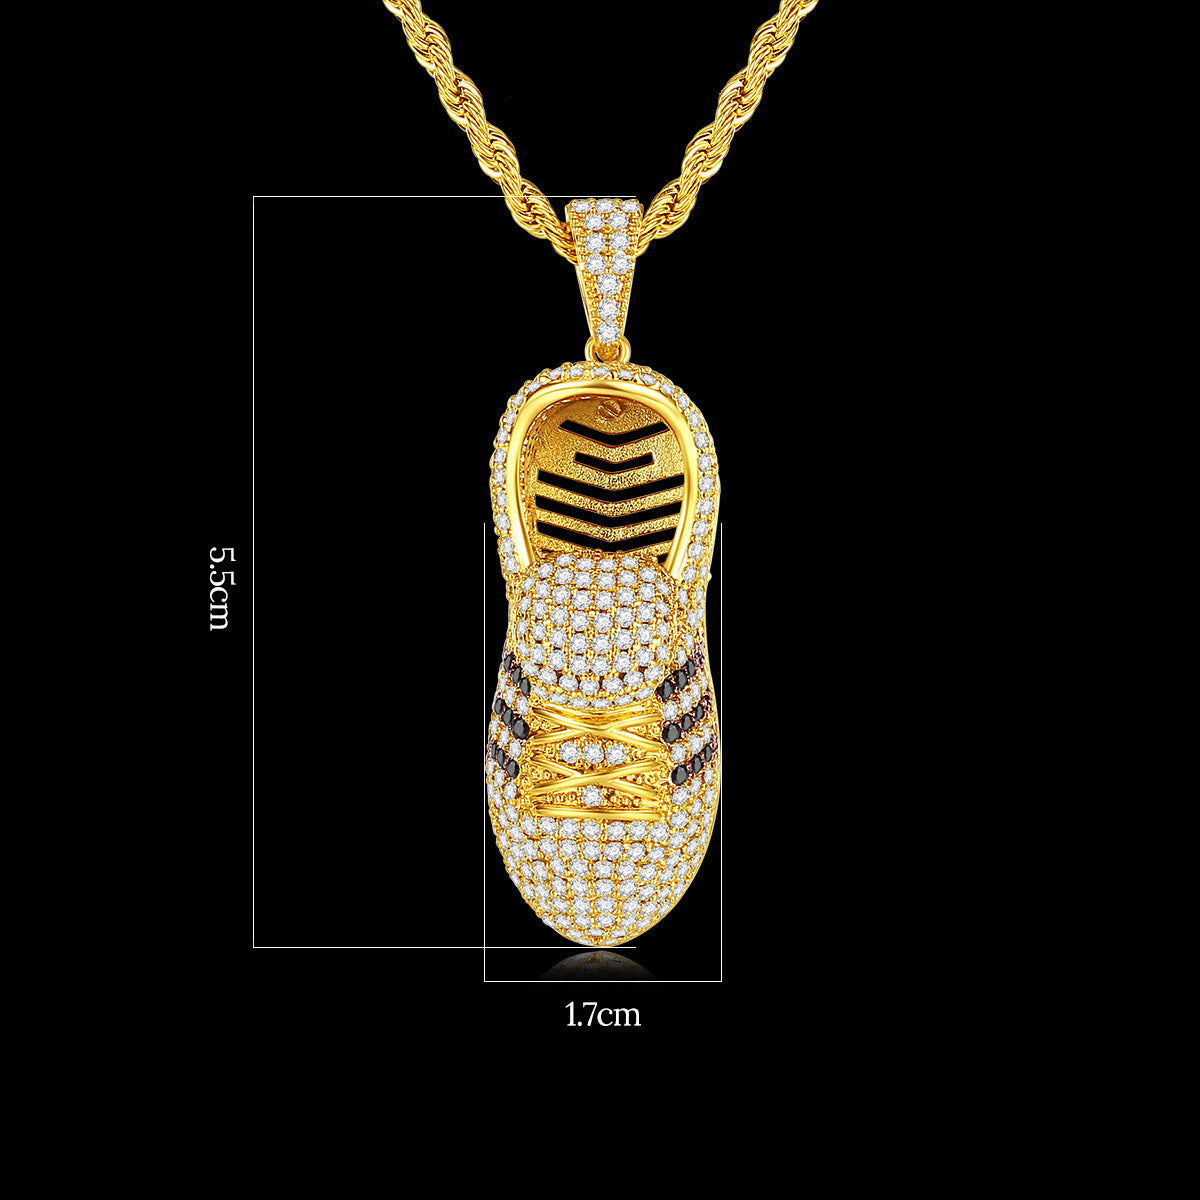 Sneakers Necklace xccscss.